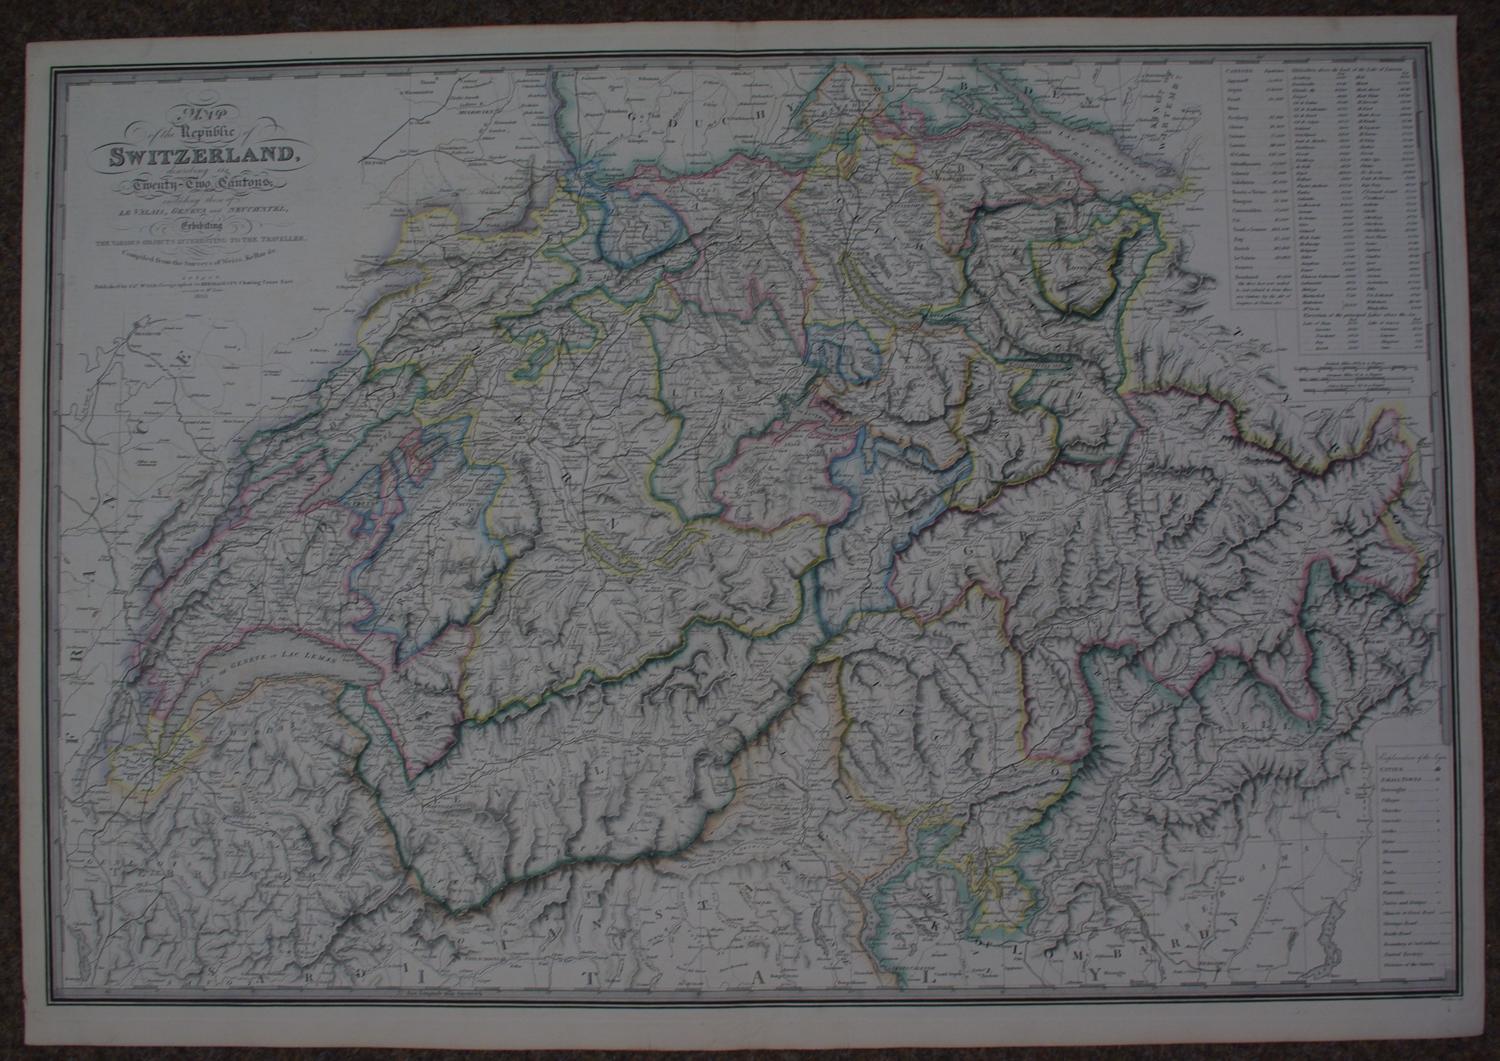 Wyld, James:- Chorographical Map of the Kingdom of Portugal